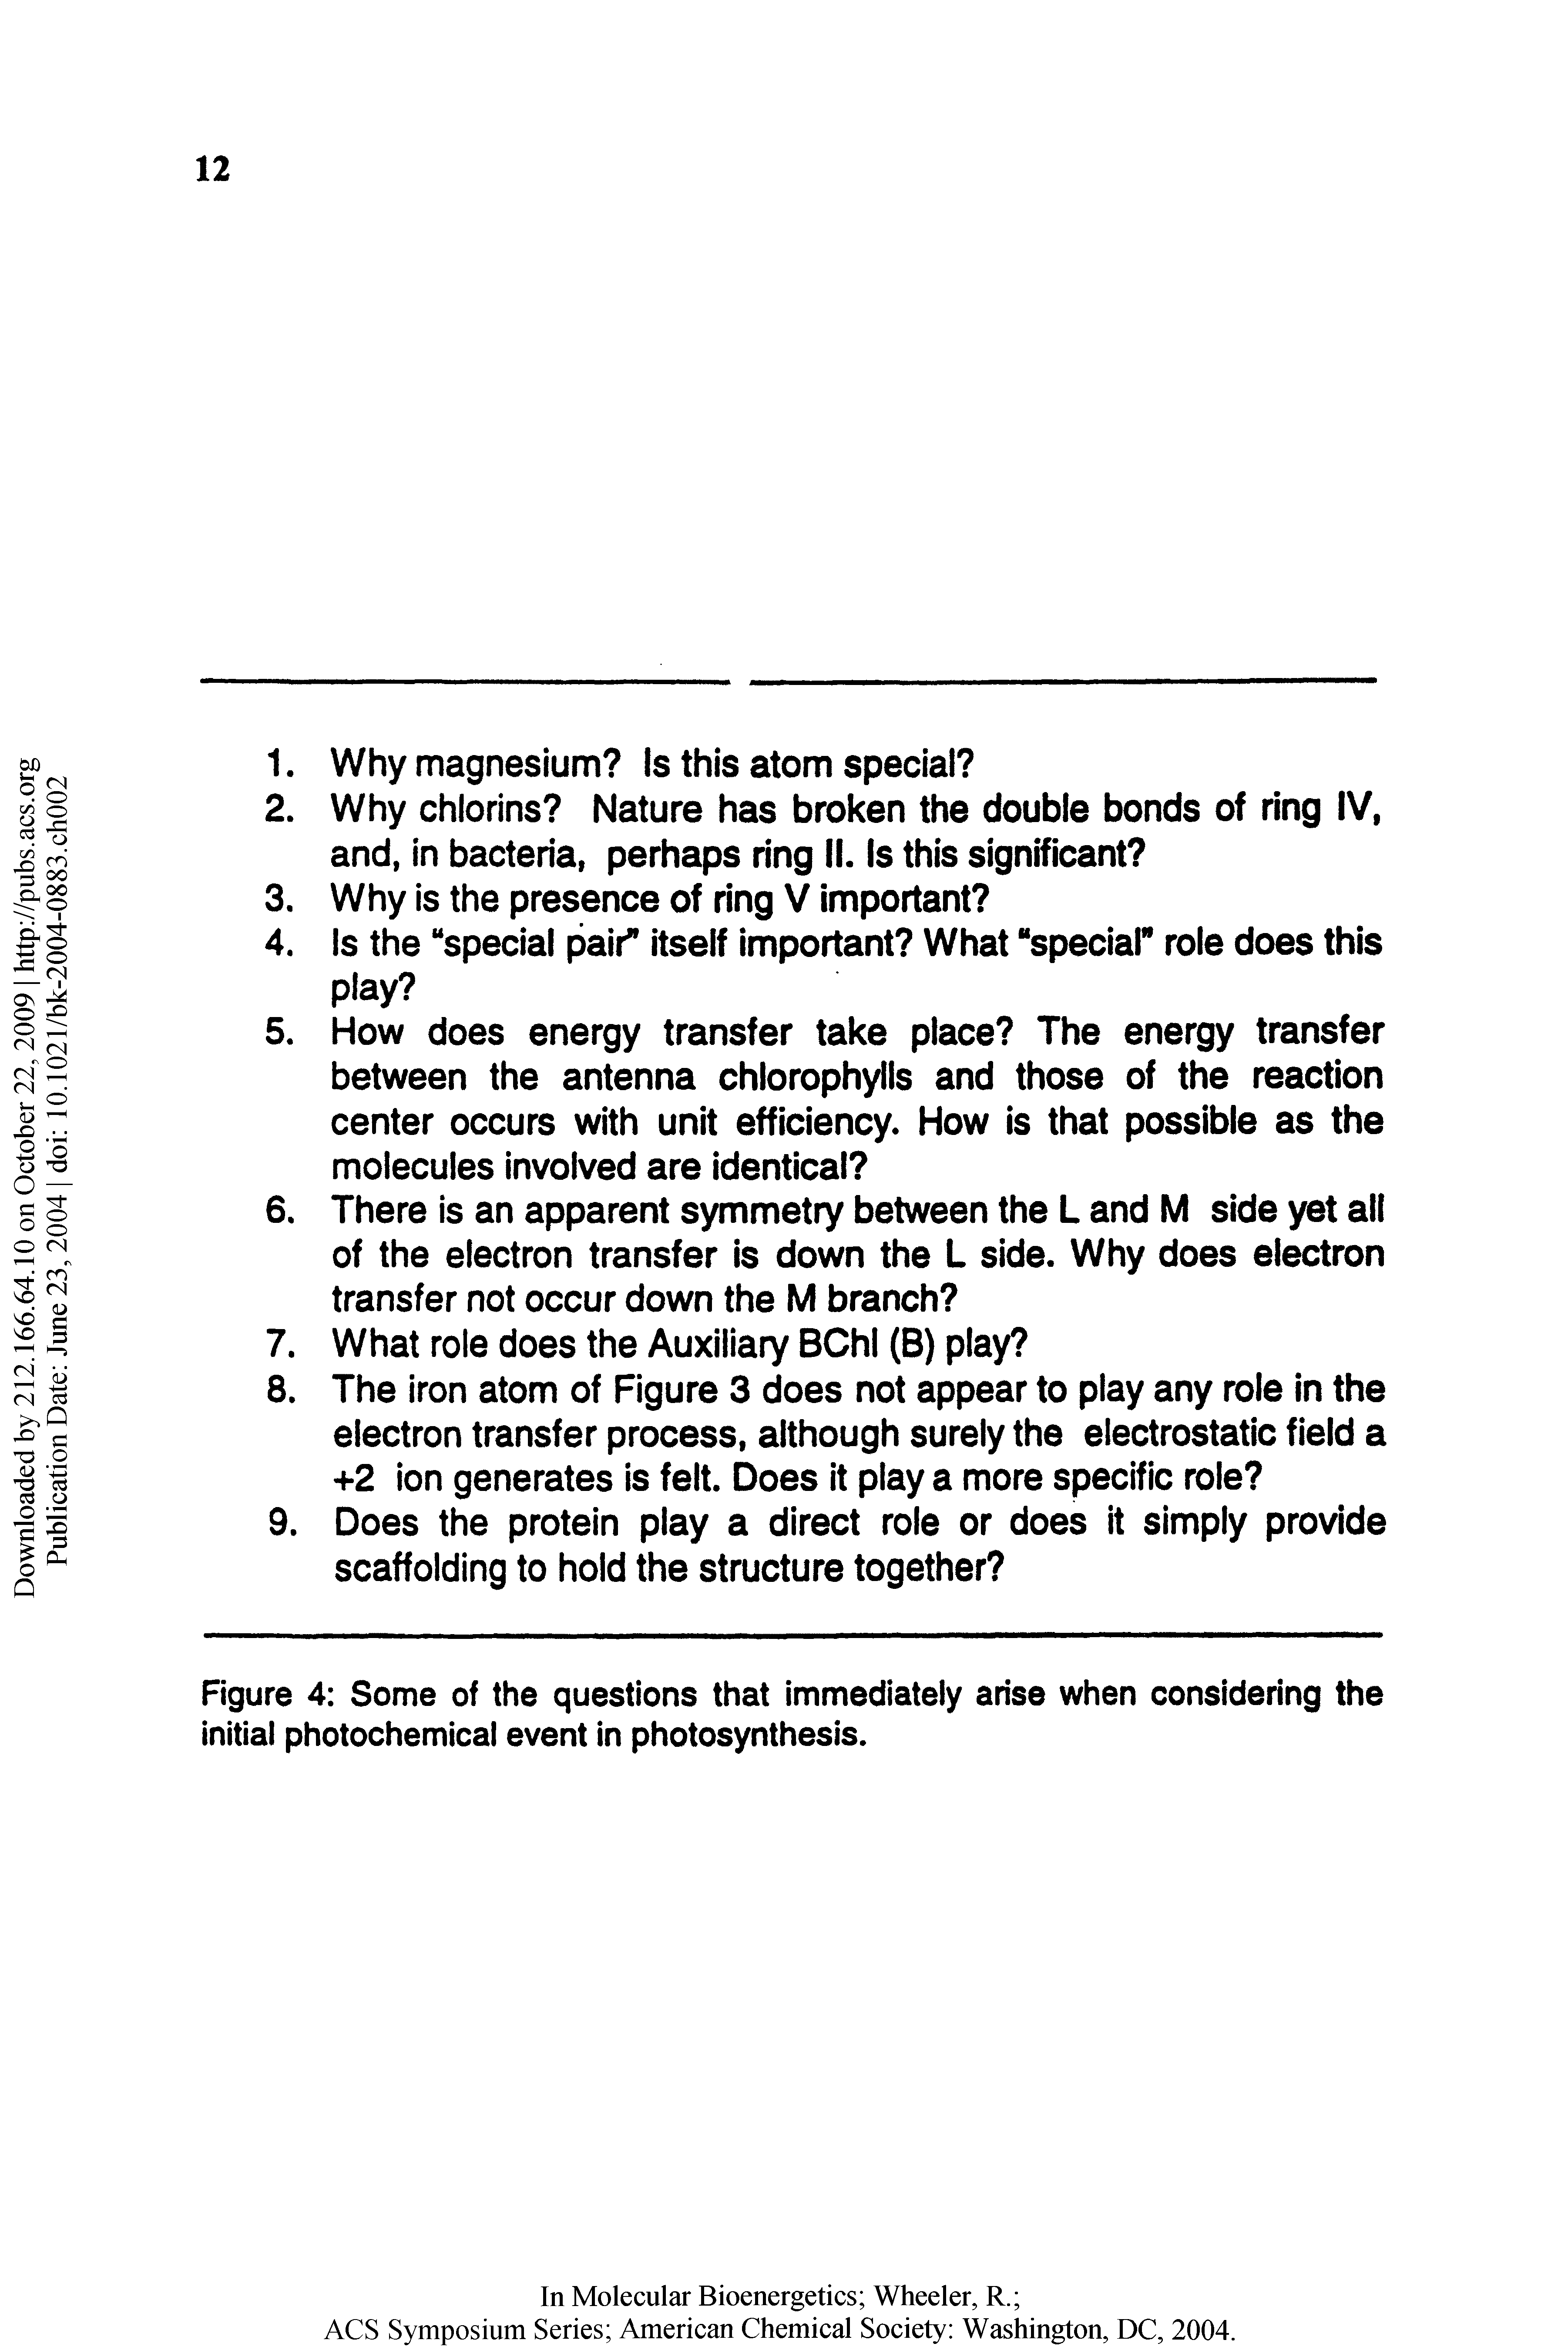 Figure 4 Some of the questions that immediately arise when considering the initial photochemical event in photosynthesis.